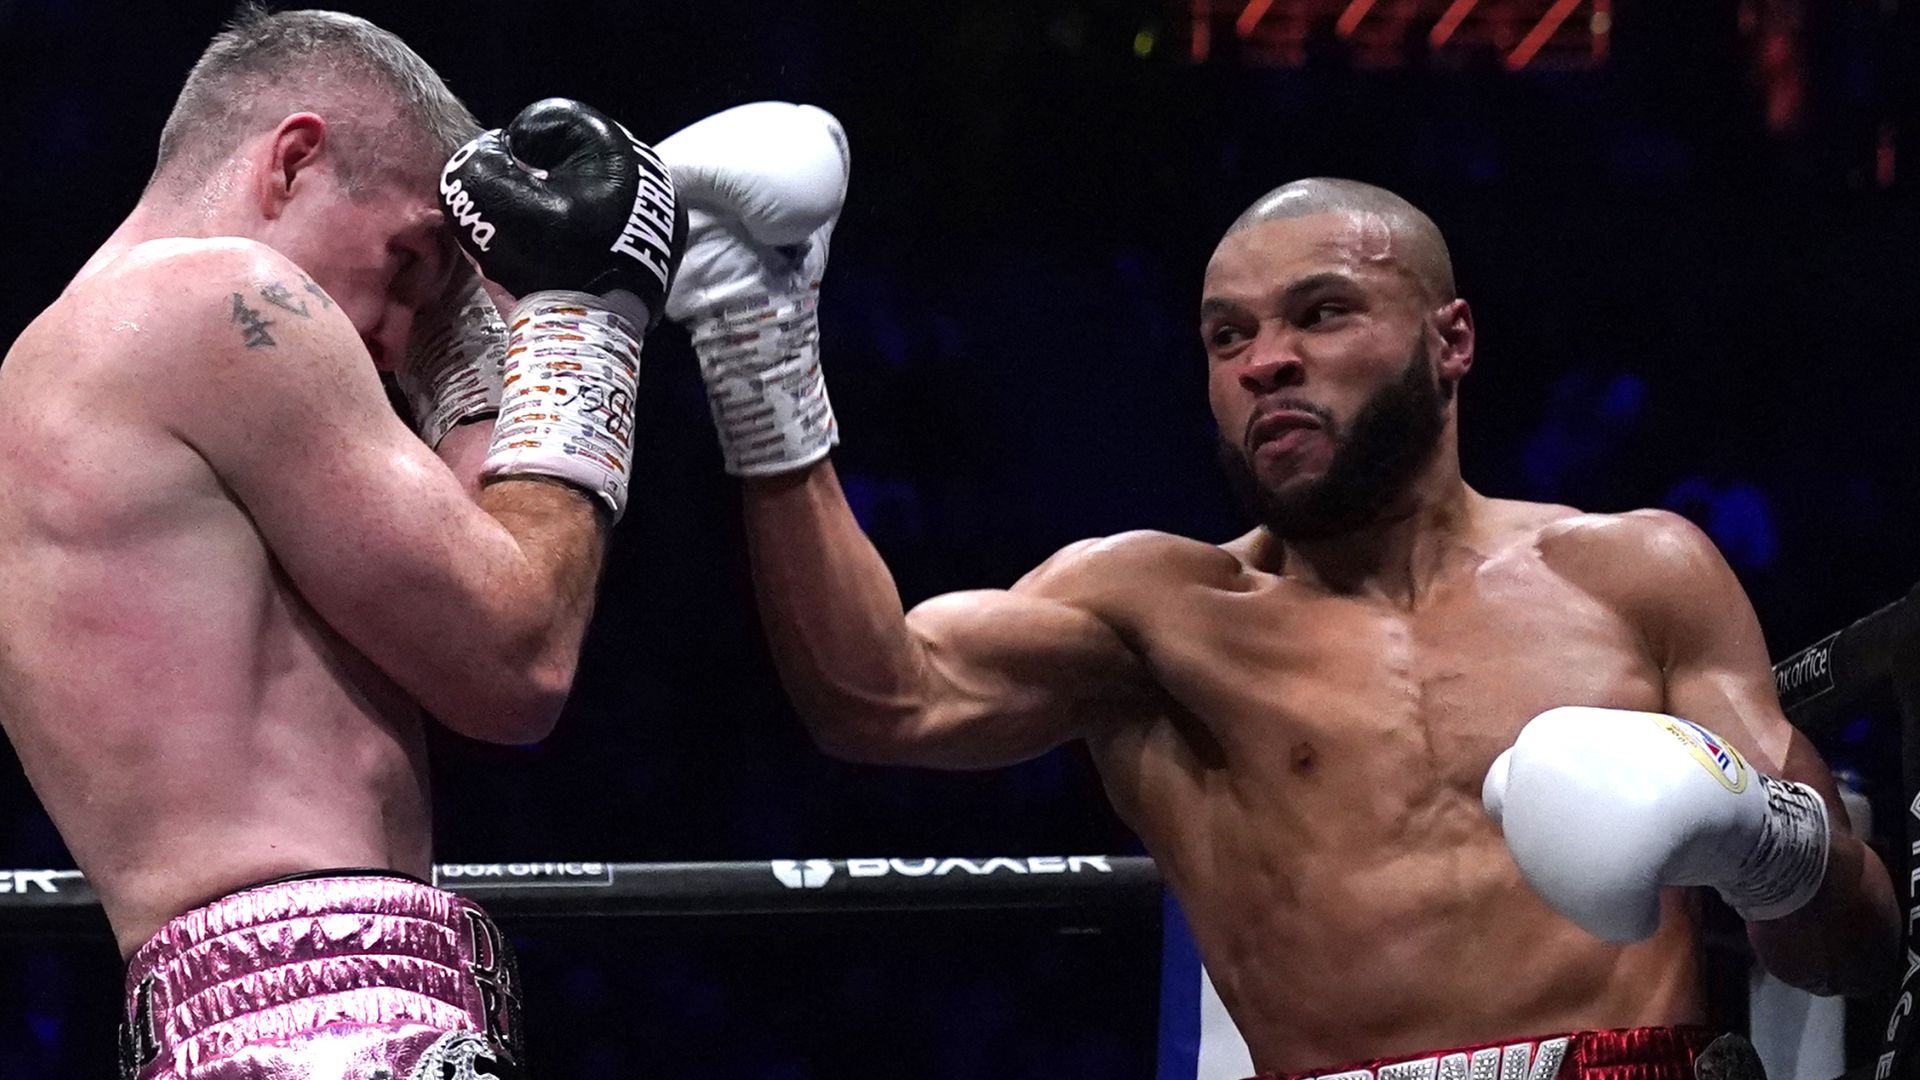 Eubank Jr: I have everything to prove | Smith: I will punish mistakes